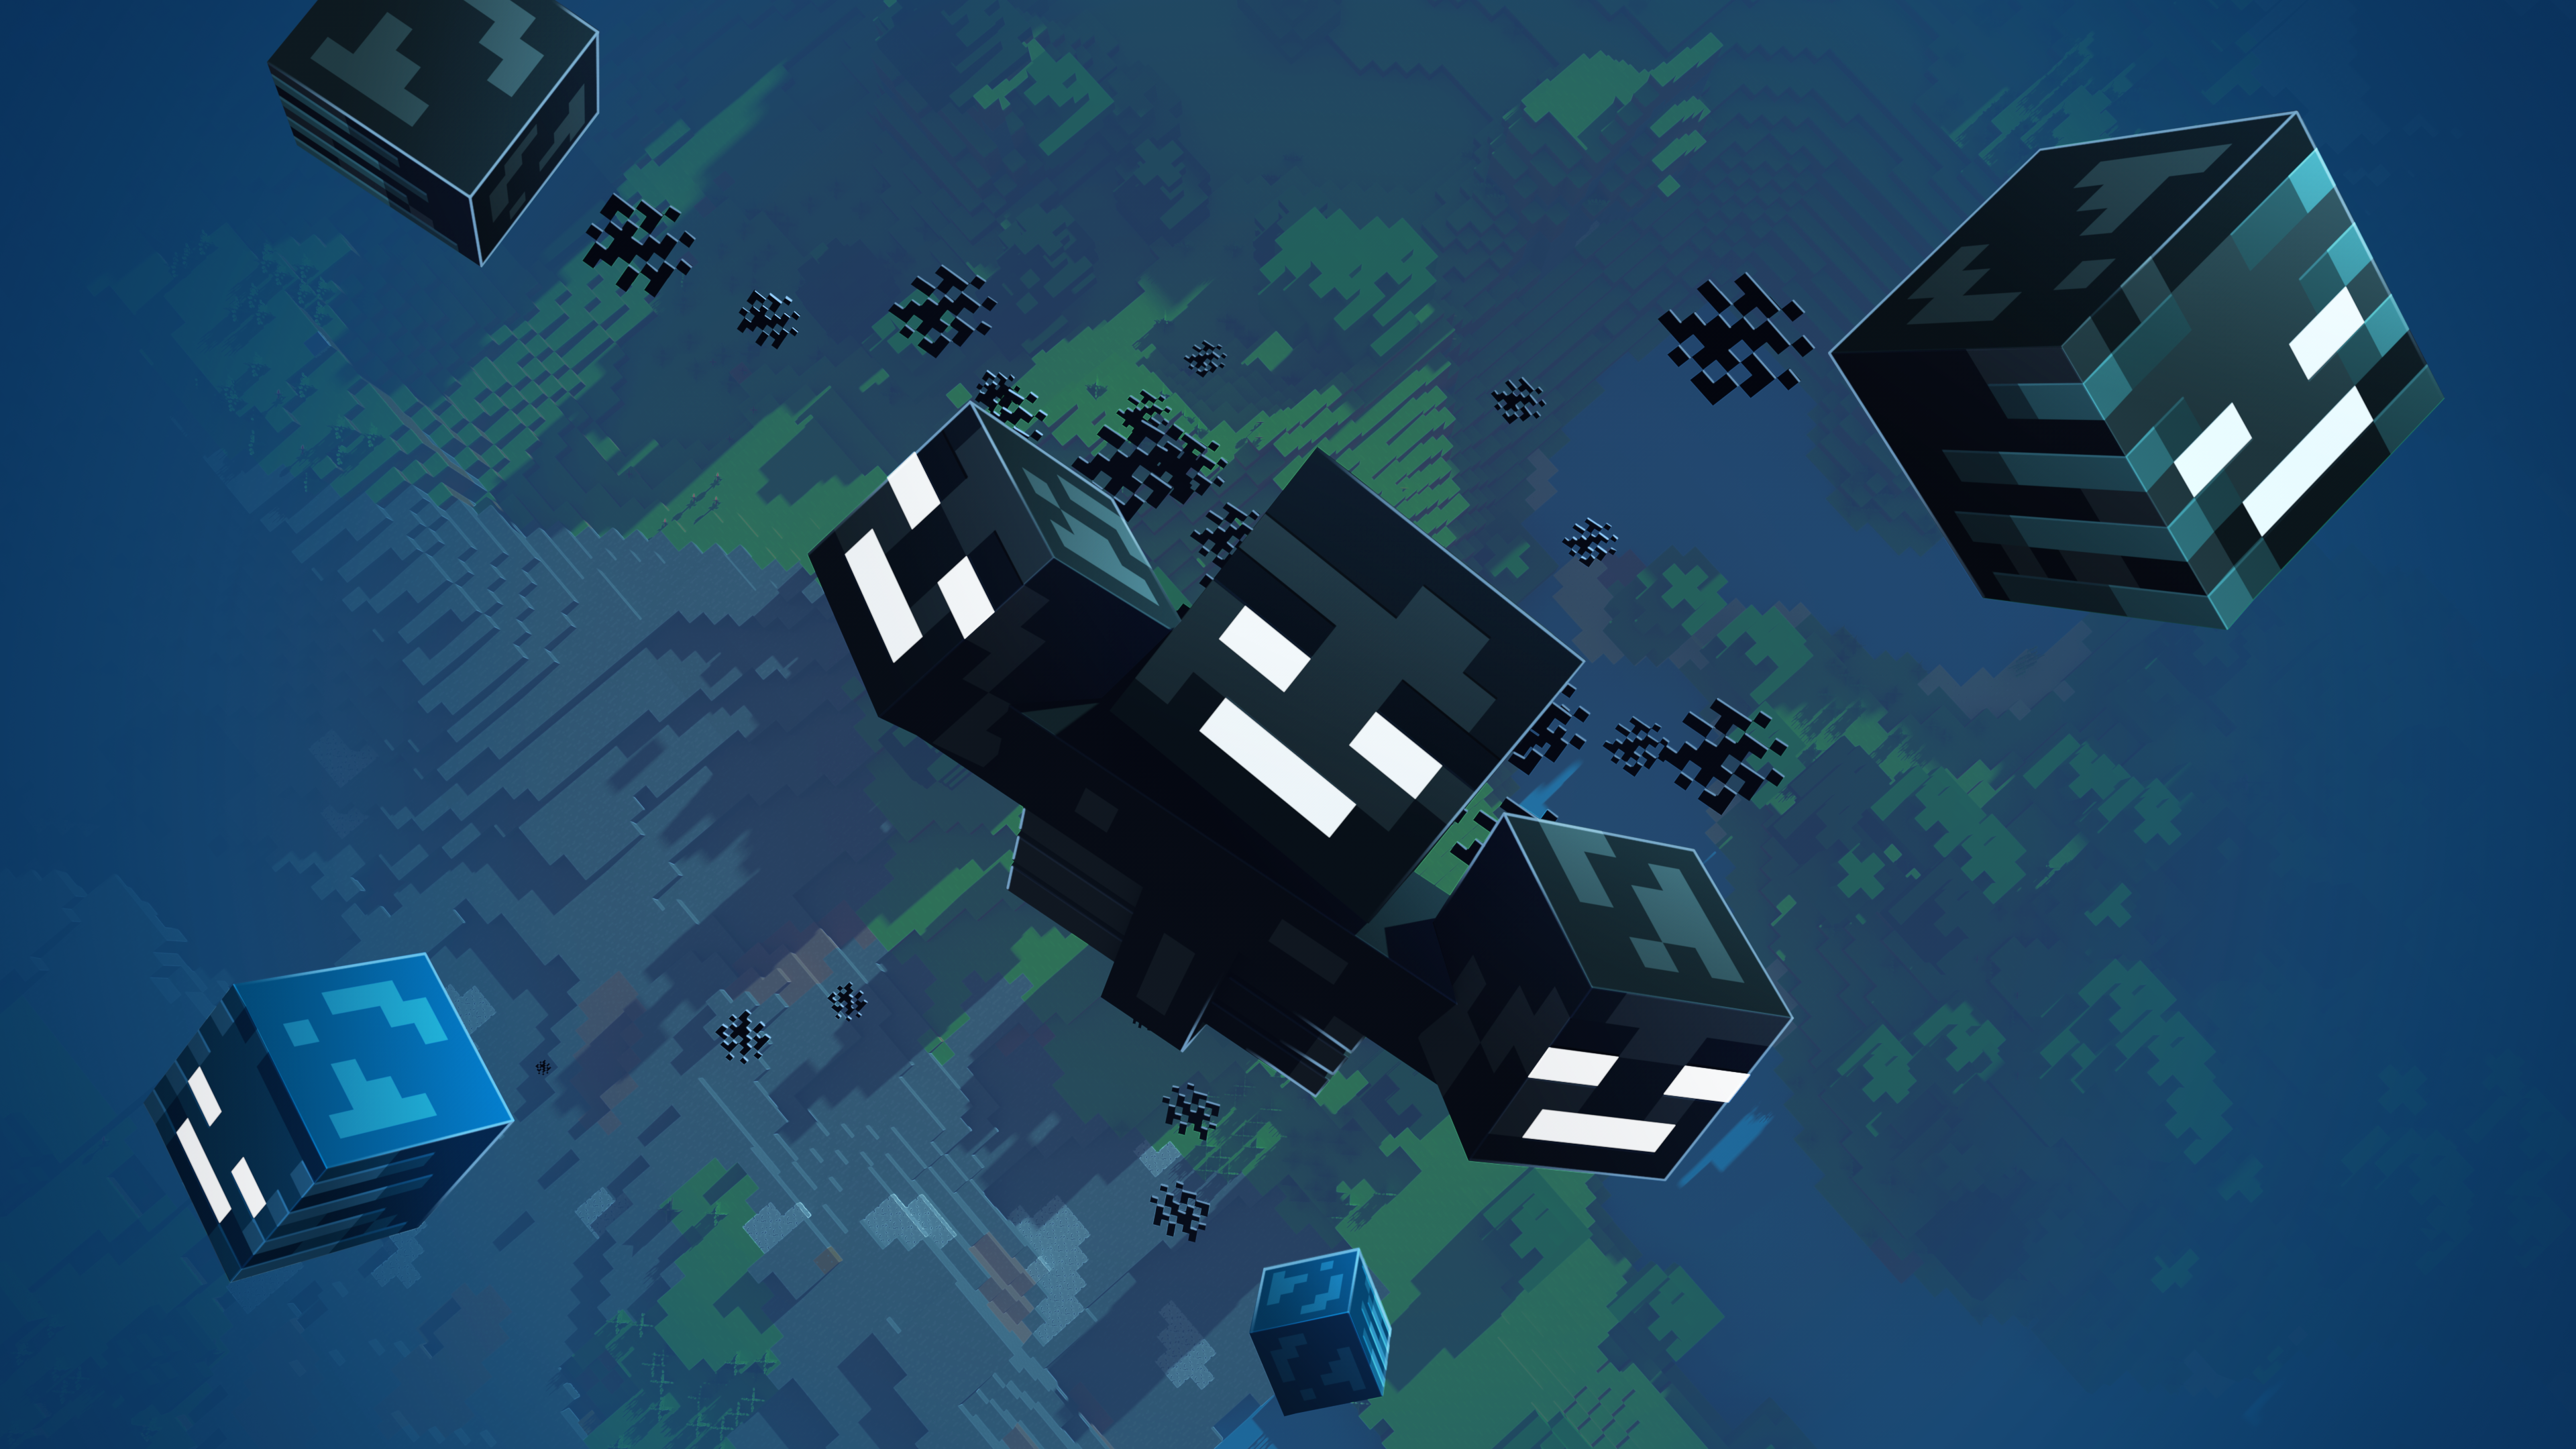 minecraft wither storm wallpapers Wallpapers